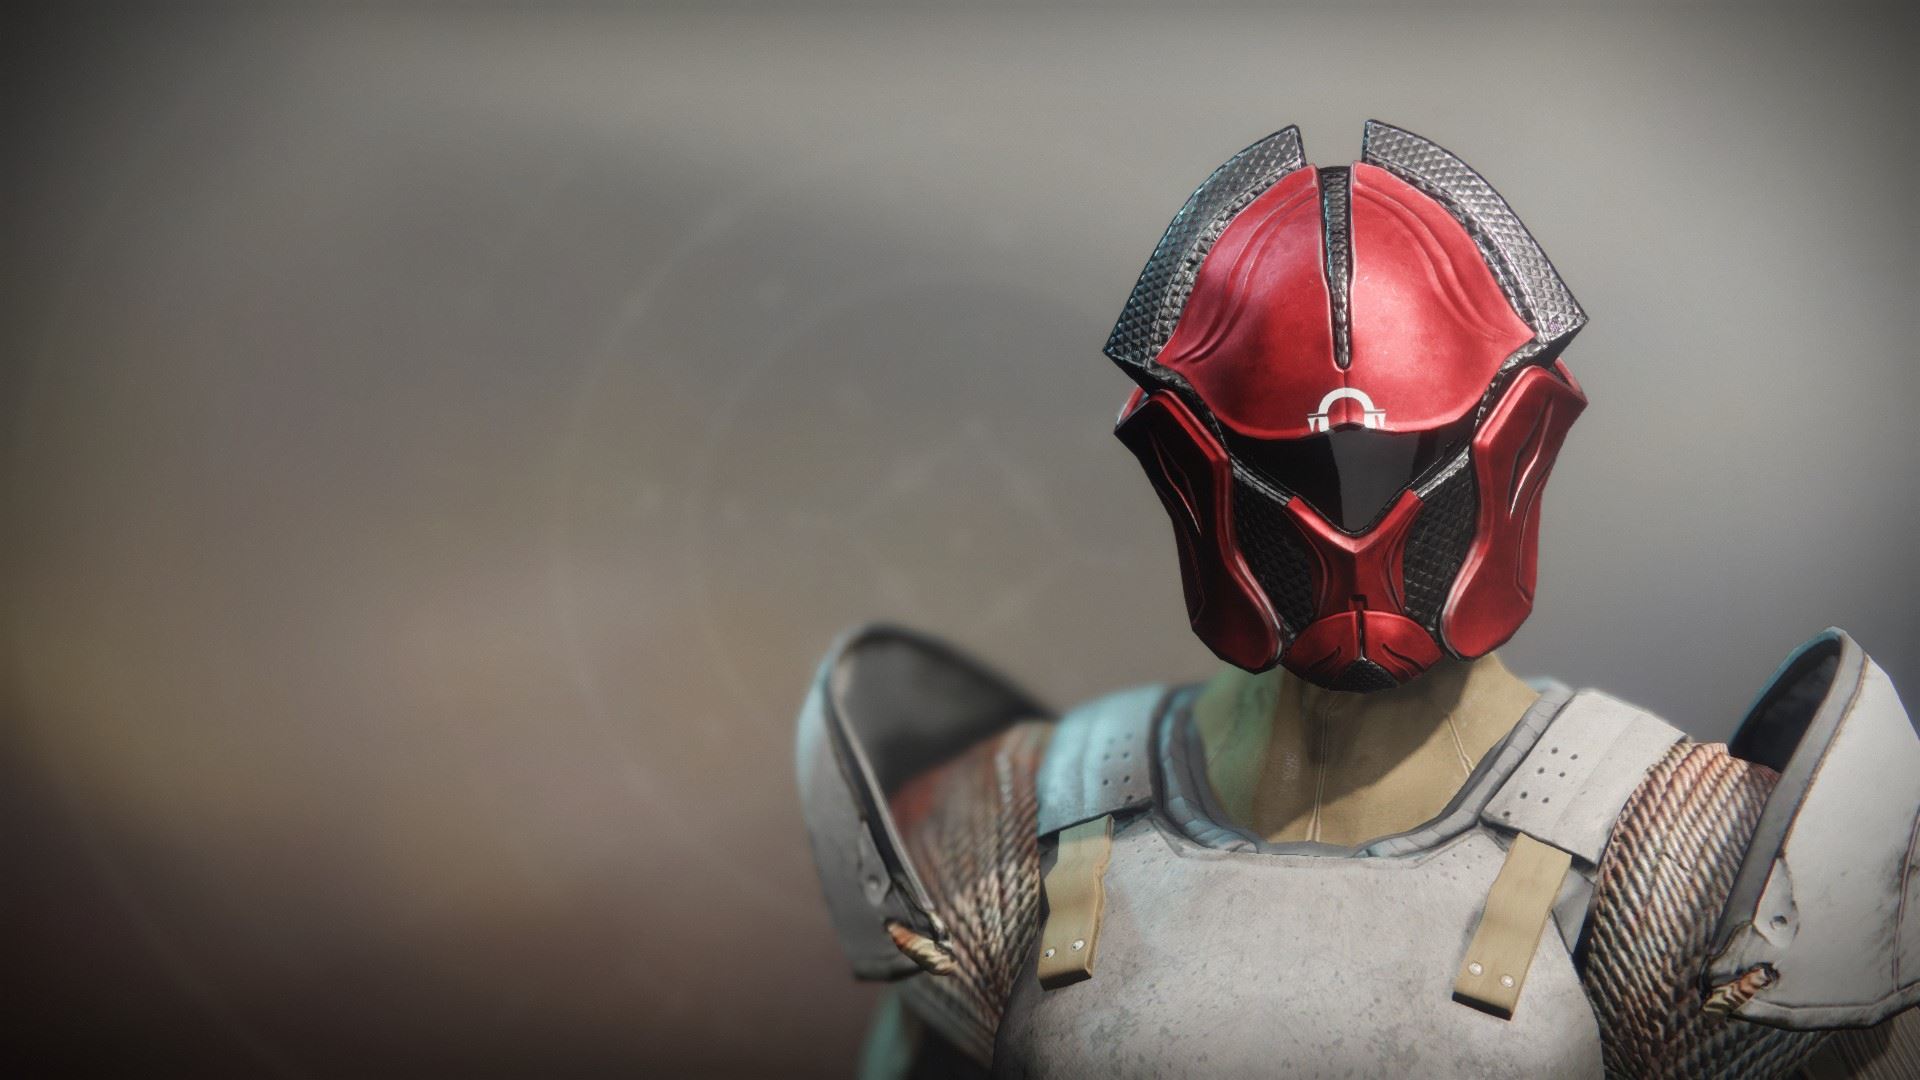 An in-game render of the Bulletsmith's Ire Helm.